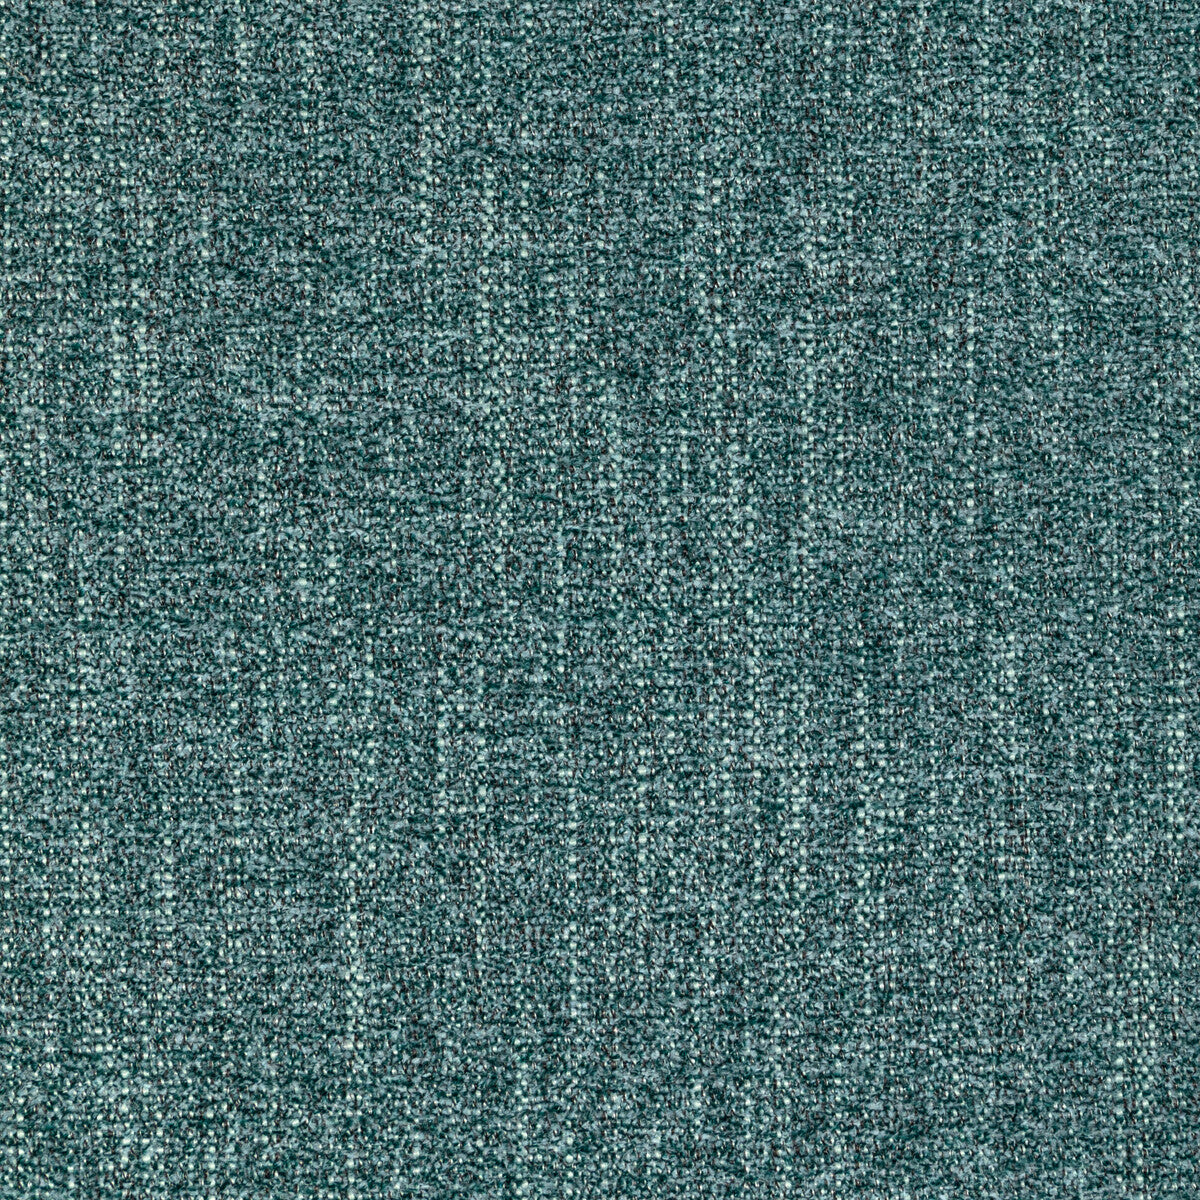 Marnie fabric in tide color - pattern 36747.35.0 - by Kravet Contract in the Refined Textures Performance Crypton collection